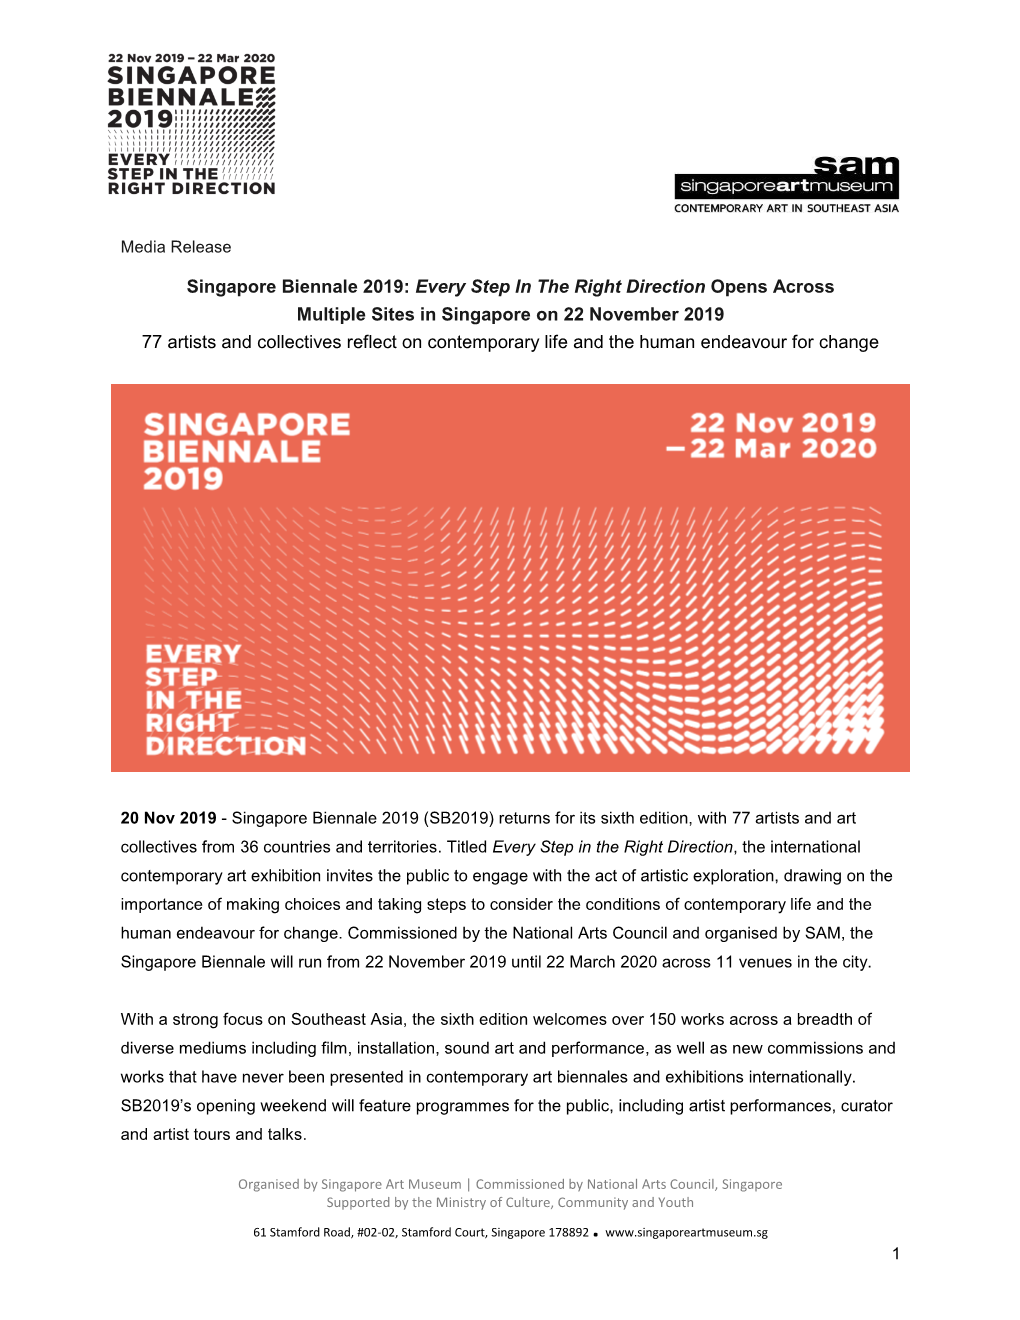 Singapore Biennale 2019: Every Step in The